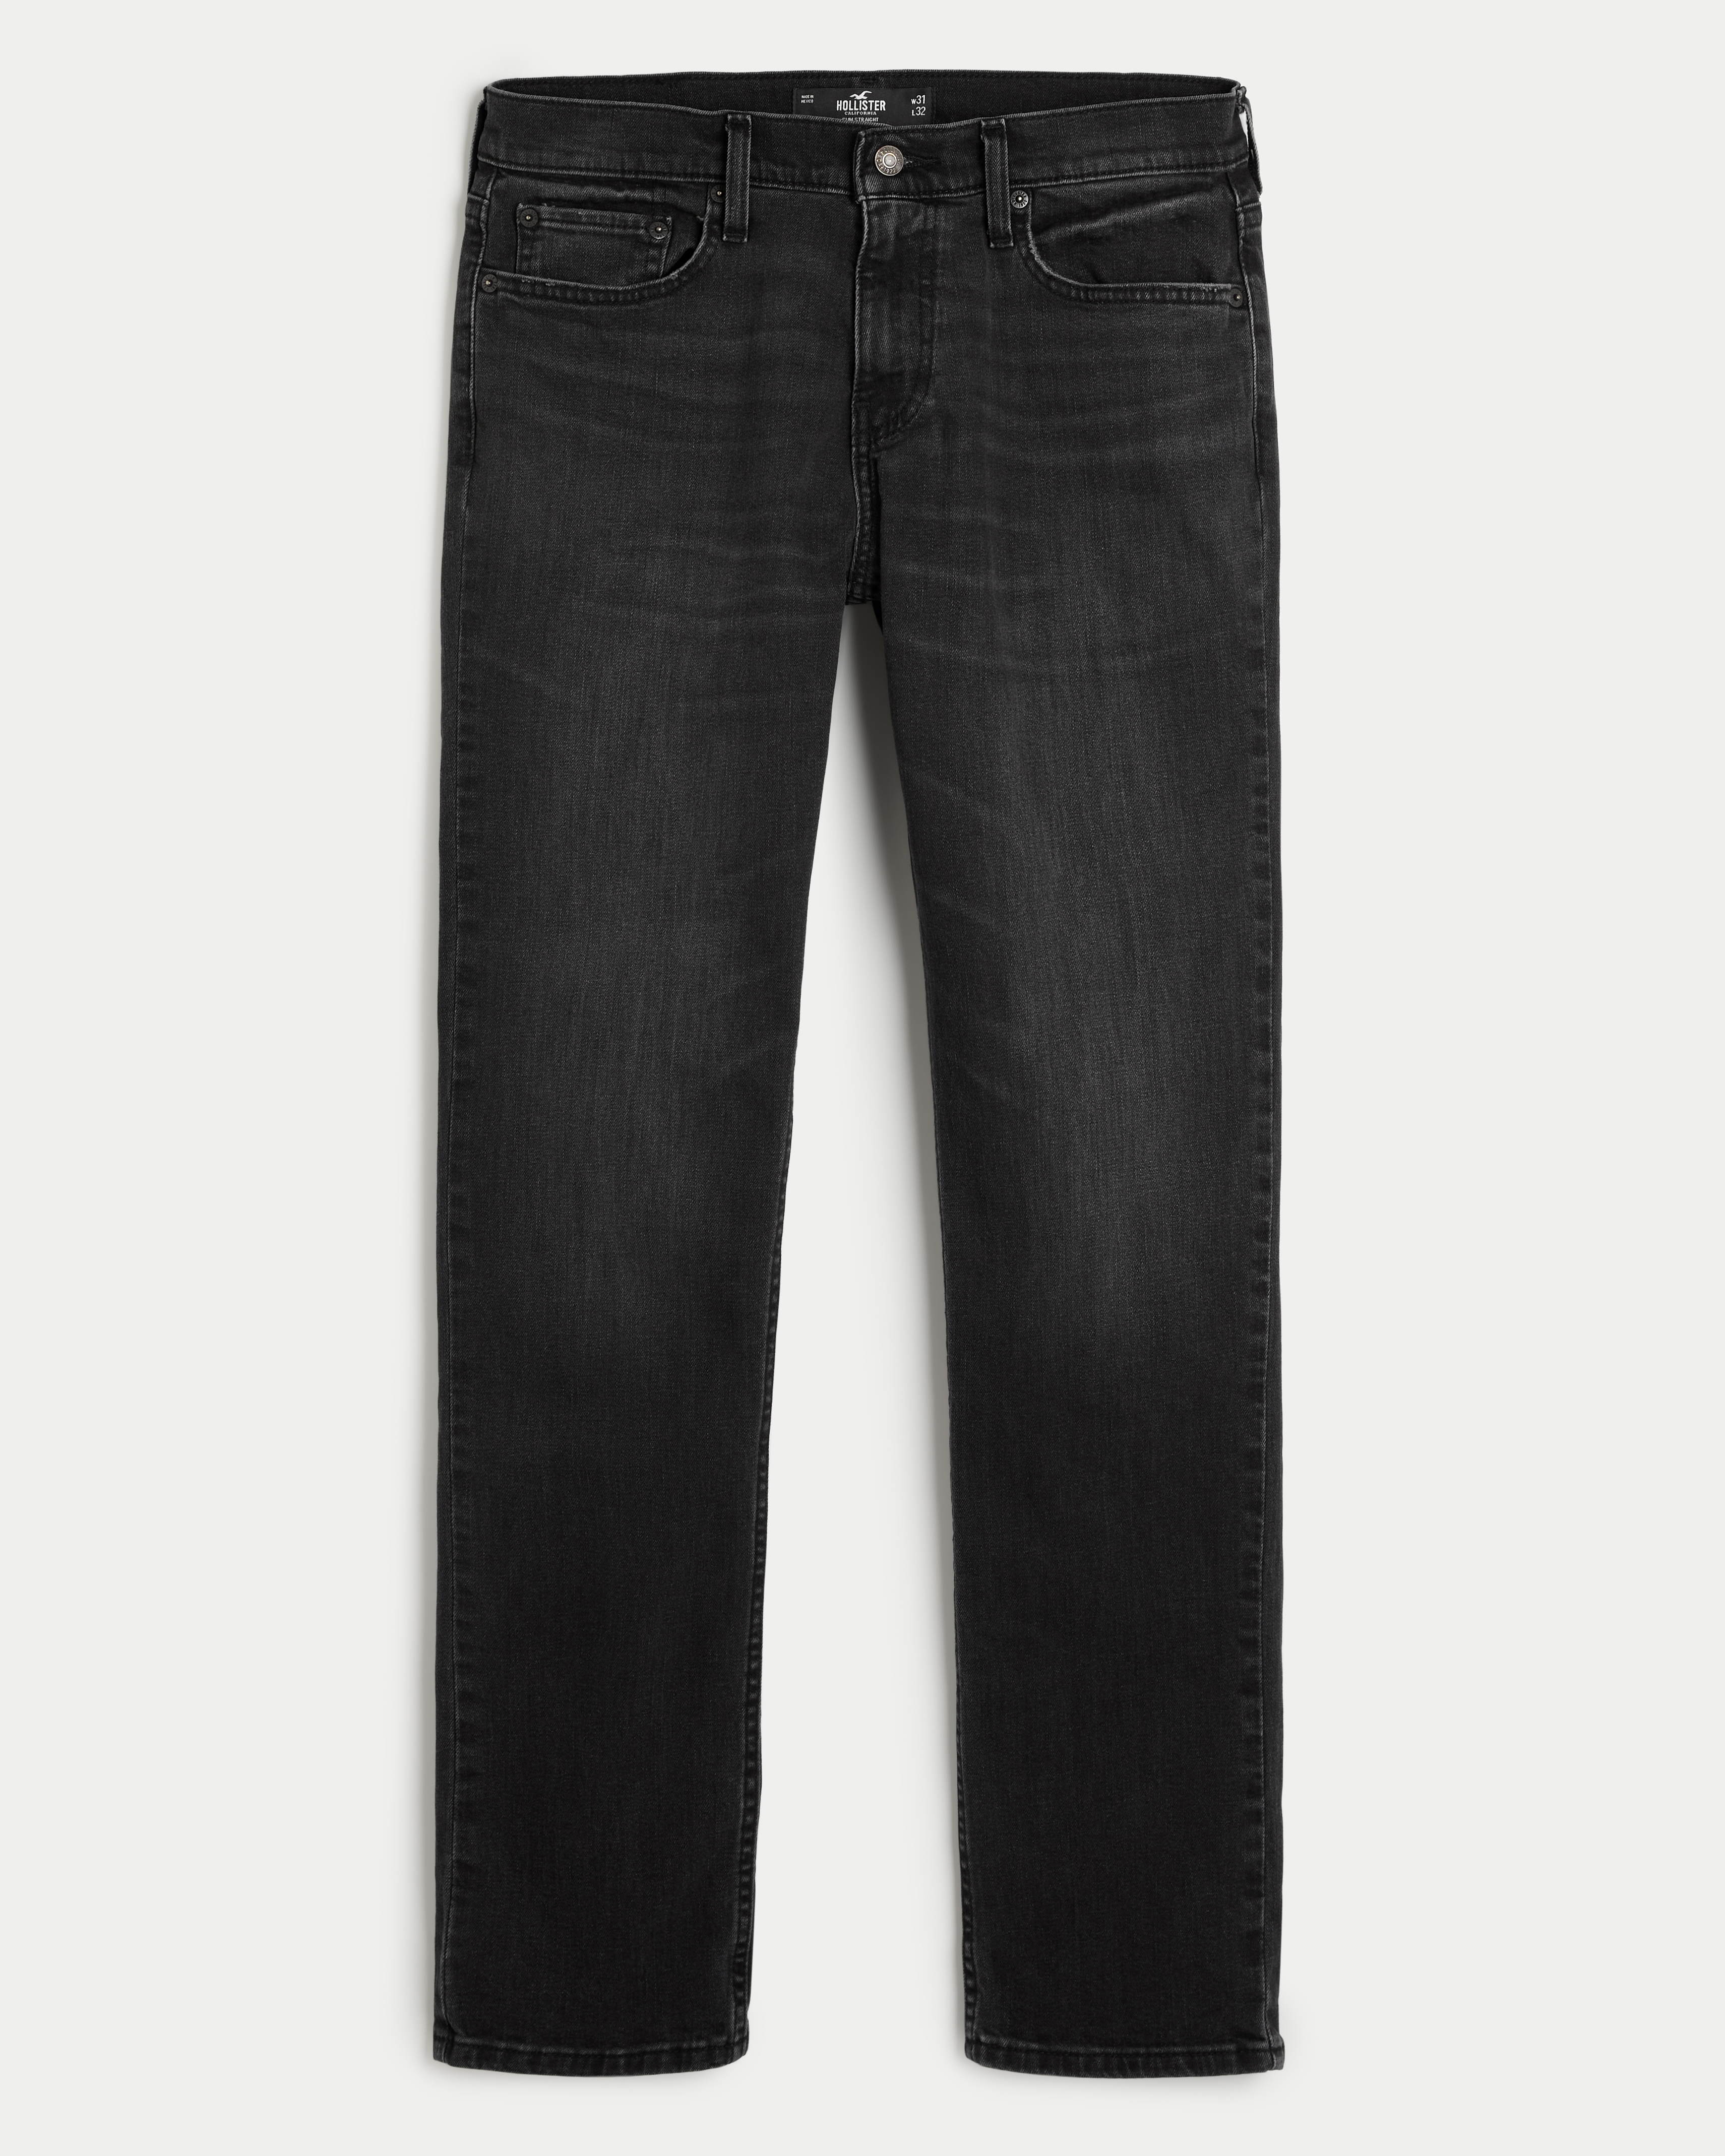 hollister jeans discount